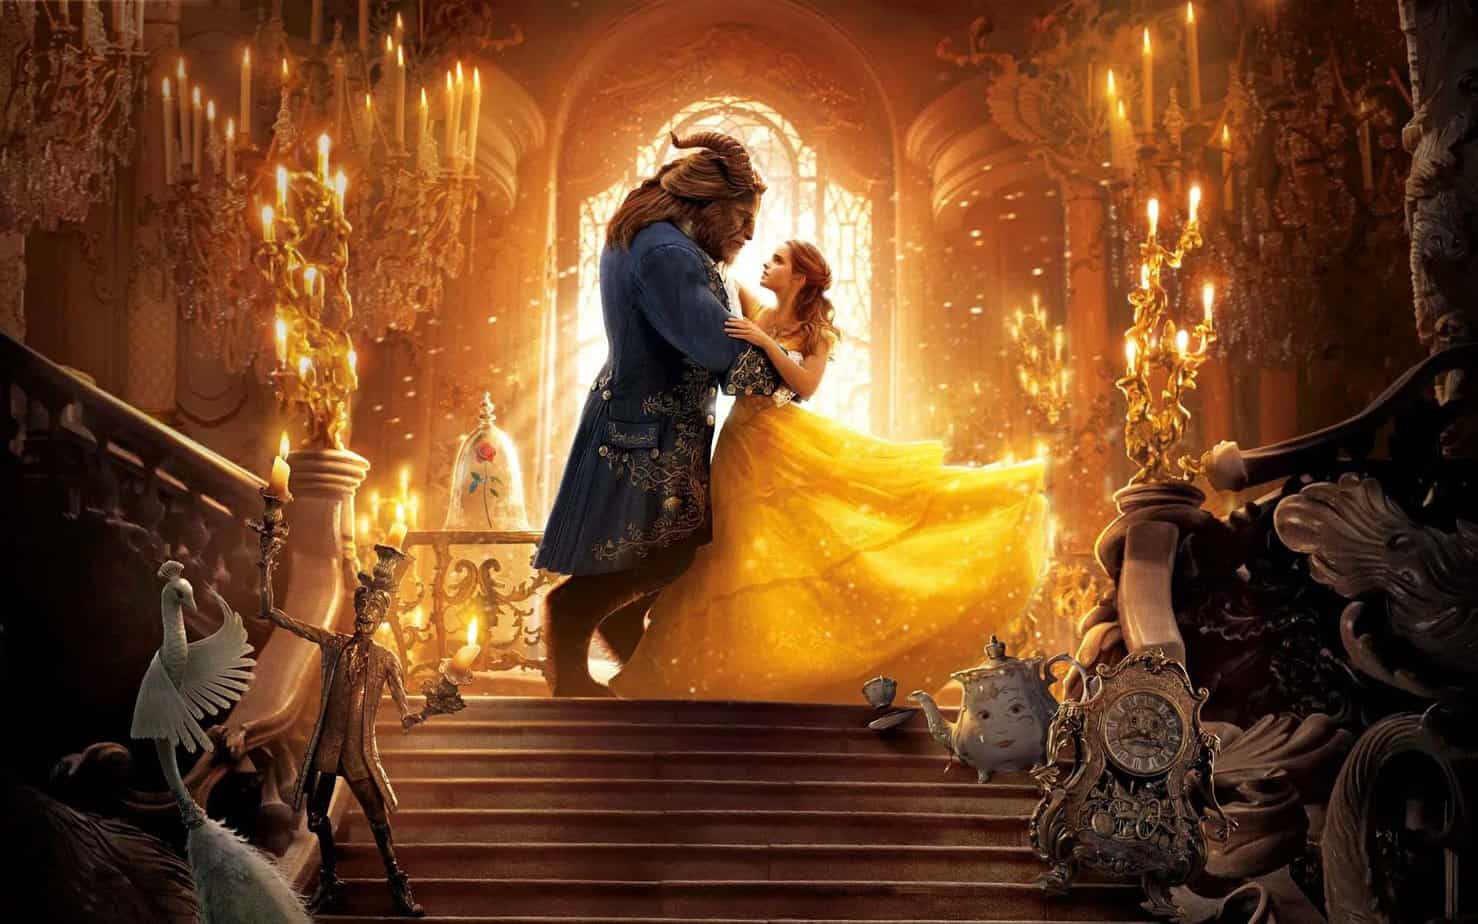 New Beauty and the Beast on Disney+? It seems to be so!